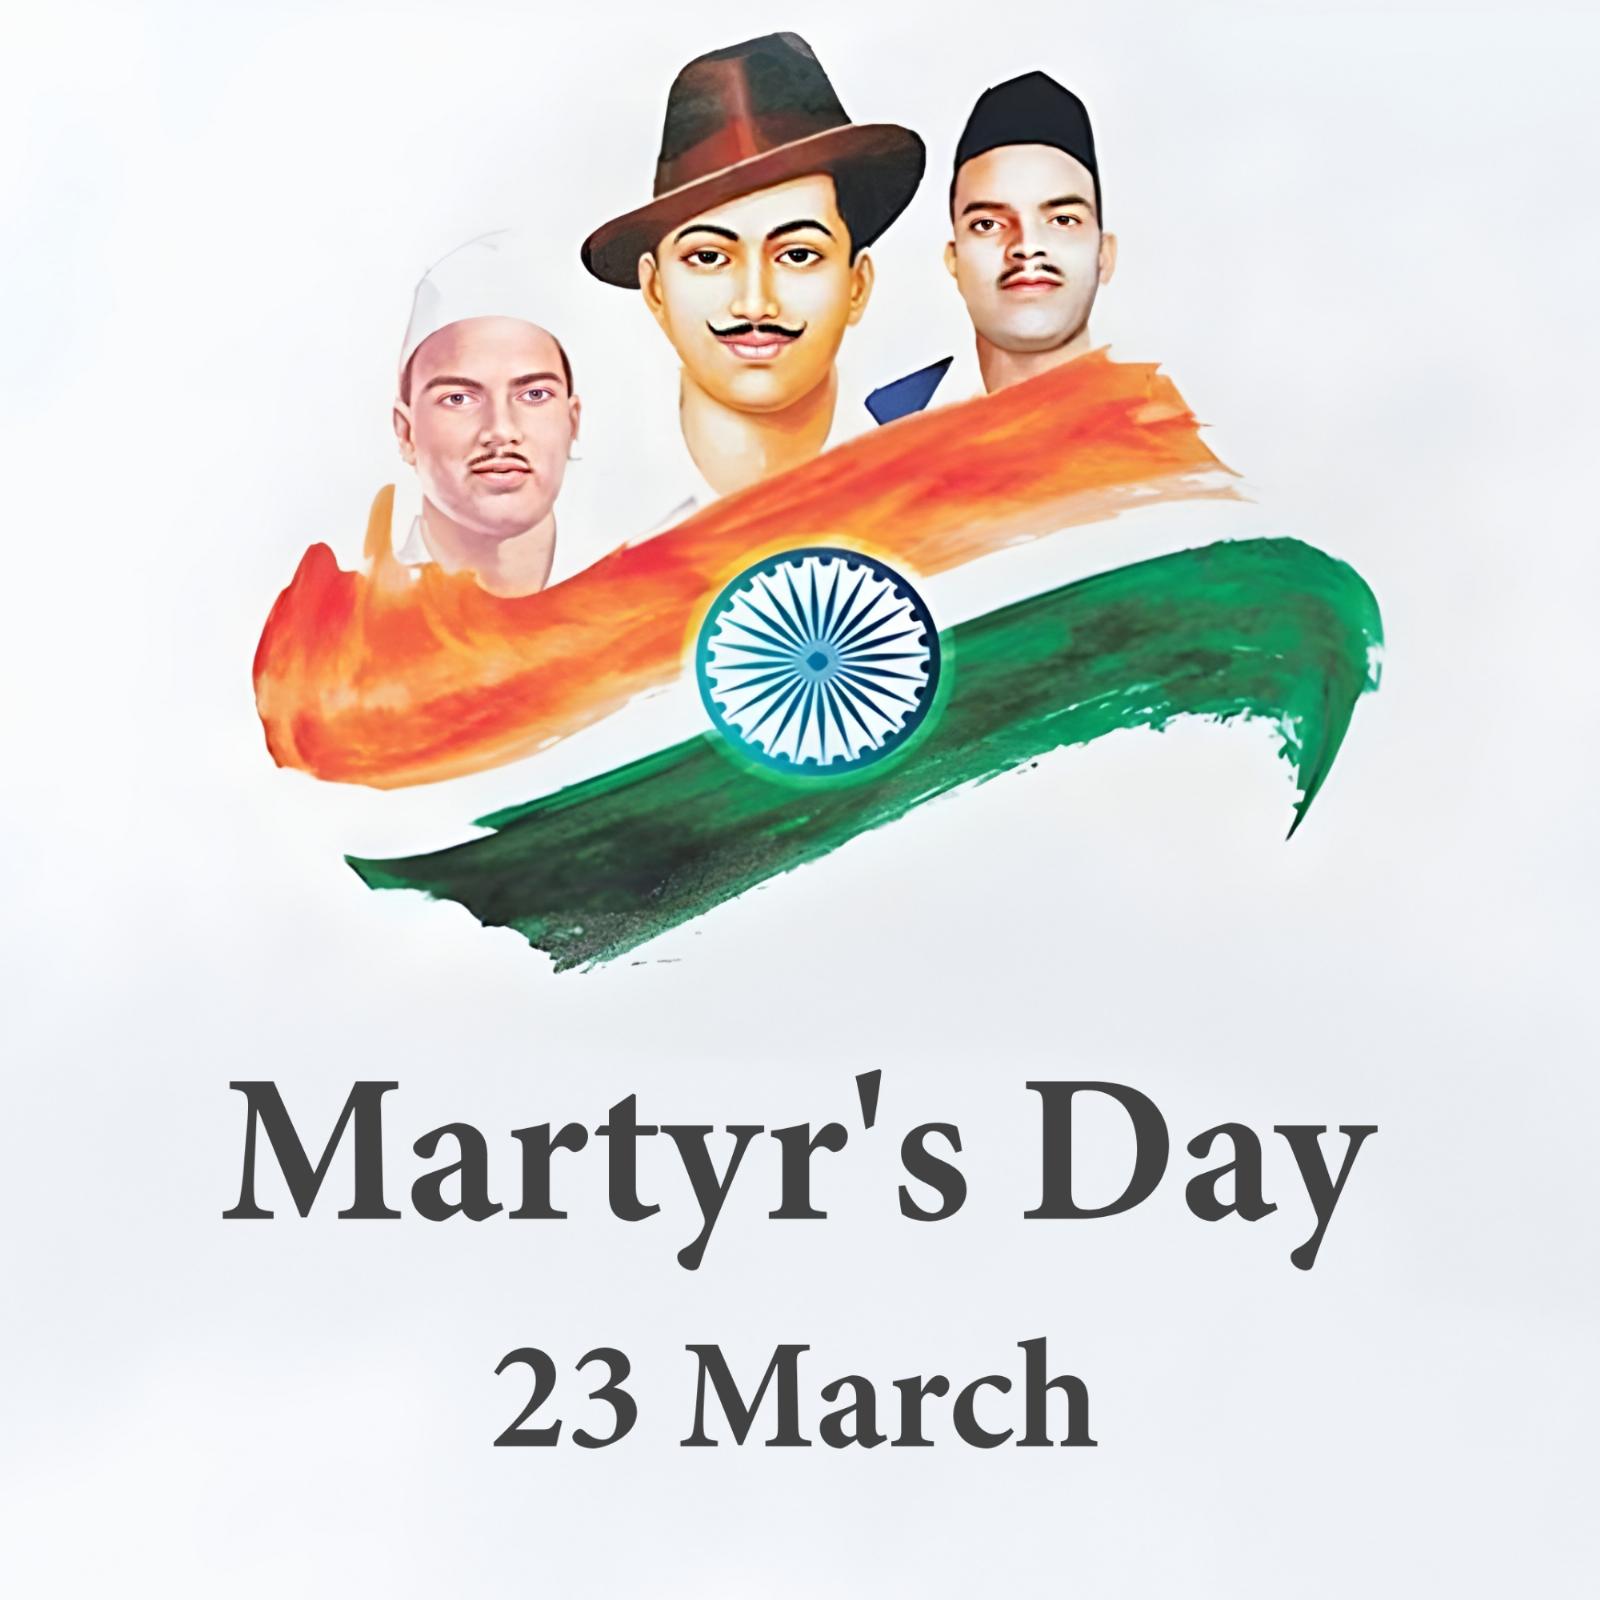 Martyr's Day 23 March Images